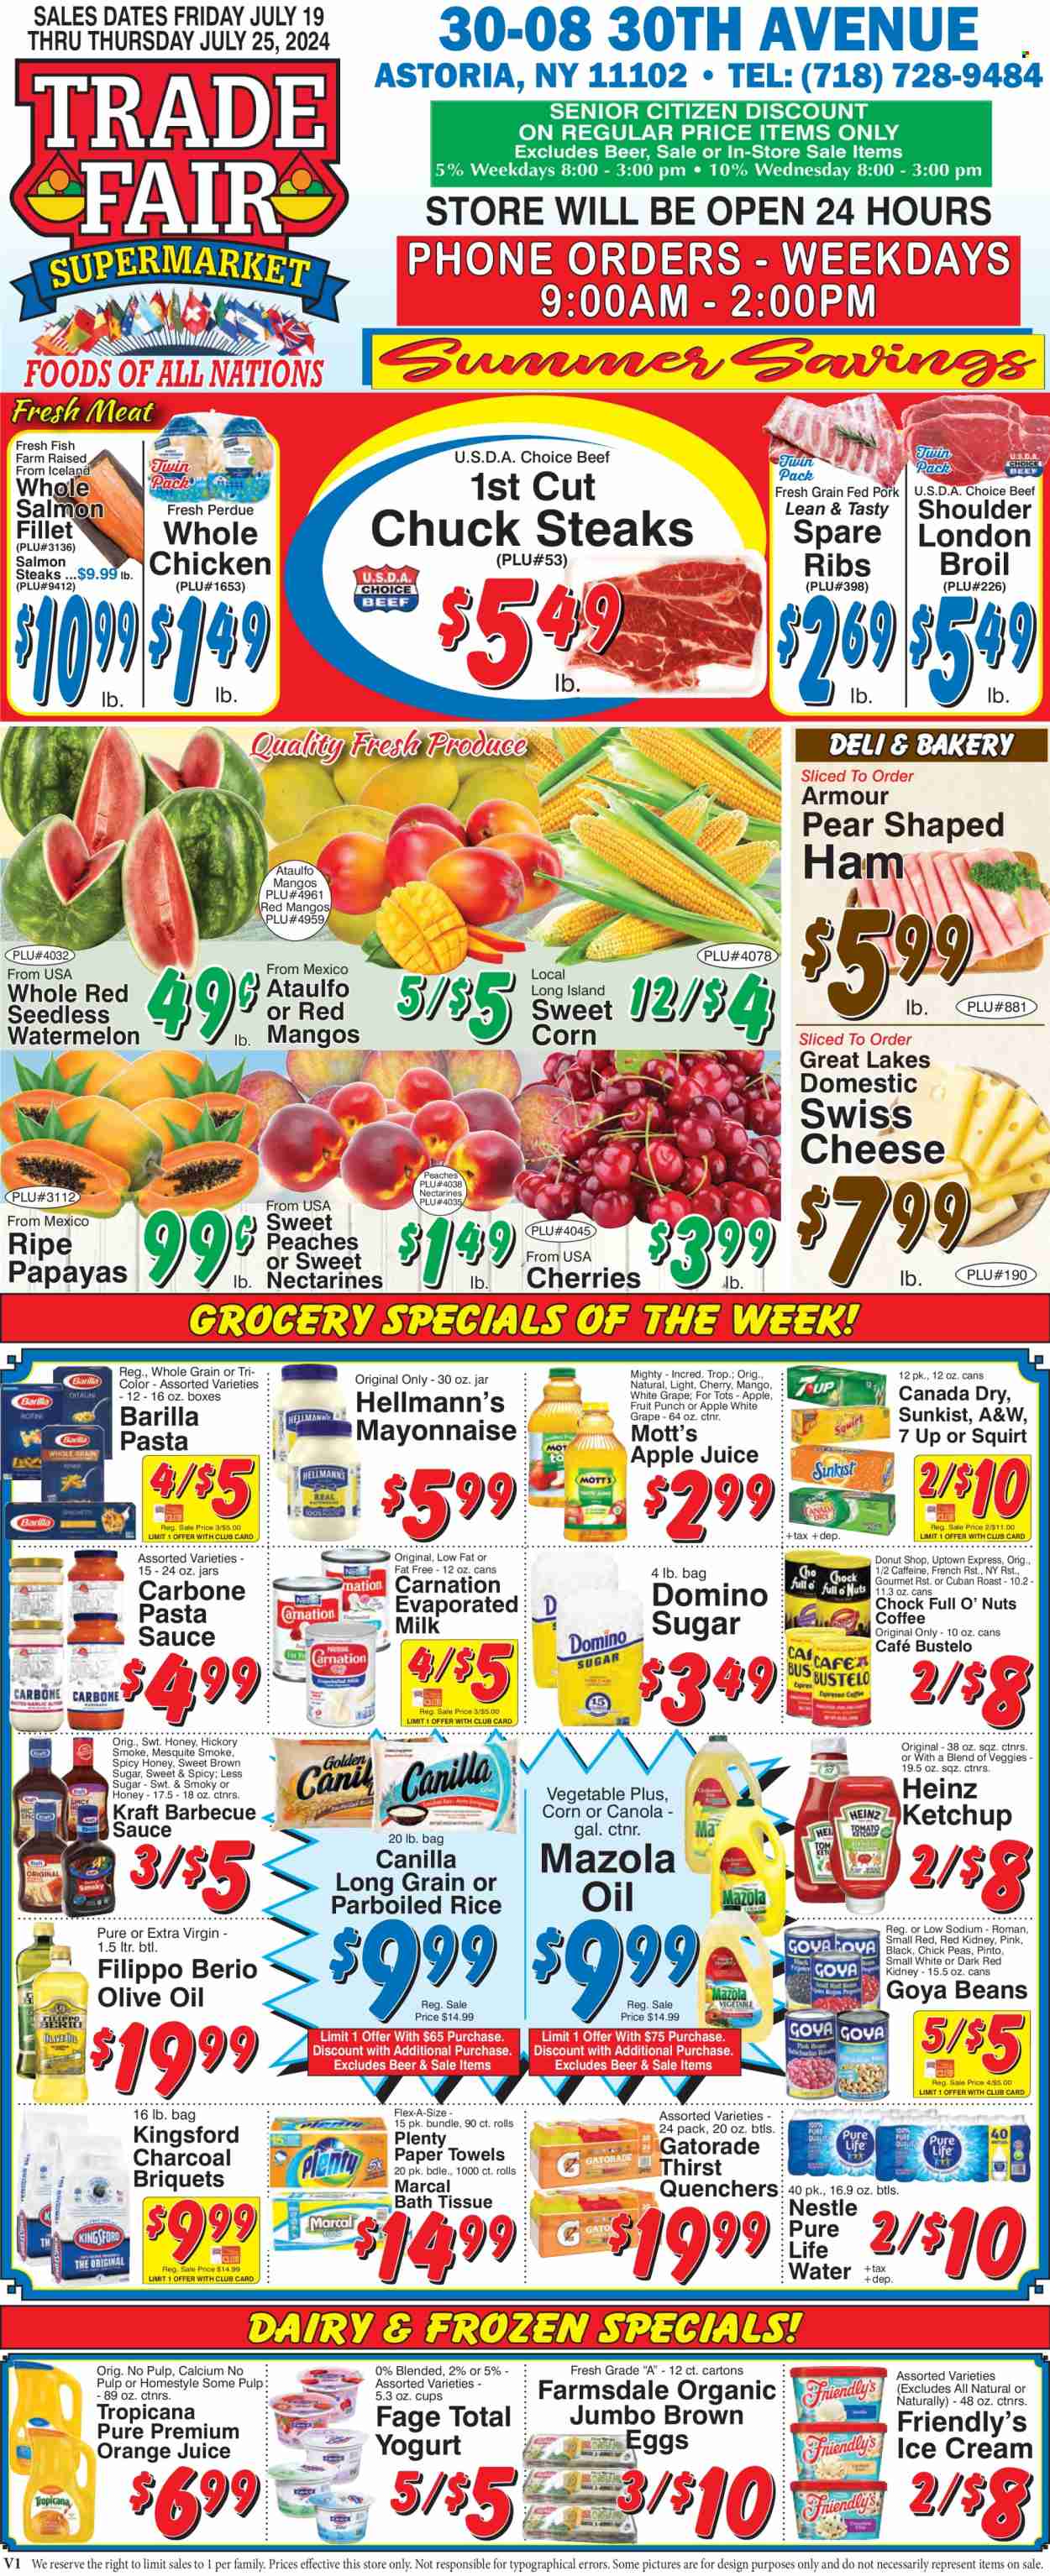 thumbnail - Trade Fair Supermarket Flyer - 07/19/2024 - 07/25/2024 - Sales products - corn, sweet corn, nectarines, papaya, peaches, Mott's, fish fillets, salmon, salmon fillet, pasta sauce, Barilla, Perdue®, Kraft®, Kingsford, spaghetti sauce, ham, swiss cheese, cheese, evaporated milk, eggs, mayonnaise, Hellmann’s, ice cream, Friendly's Ice Cream, Nestlé, cane sugar, Heinz, Goya, chickpeas, parboiled rice, BBQ sauce, ketchup, extra virgin olive oil, olive oil, oil, apple juice, Canada Dry, ginger ale, orange juice, juice, 7UP, A&W, Gatorade, fruit punch, electrolyte drink, Pure Life Water, water, carbonated soft drink, alcohol, beer, whole chicken, chicken, steak, ribs, pork spare ribs, bath tissue, Plenty, kitchen towels, paper towels. Page 1.